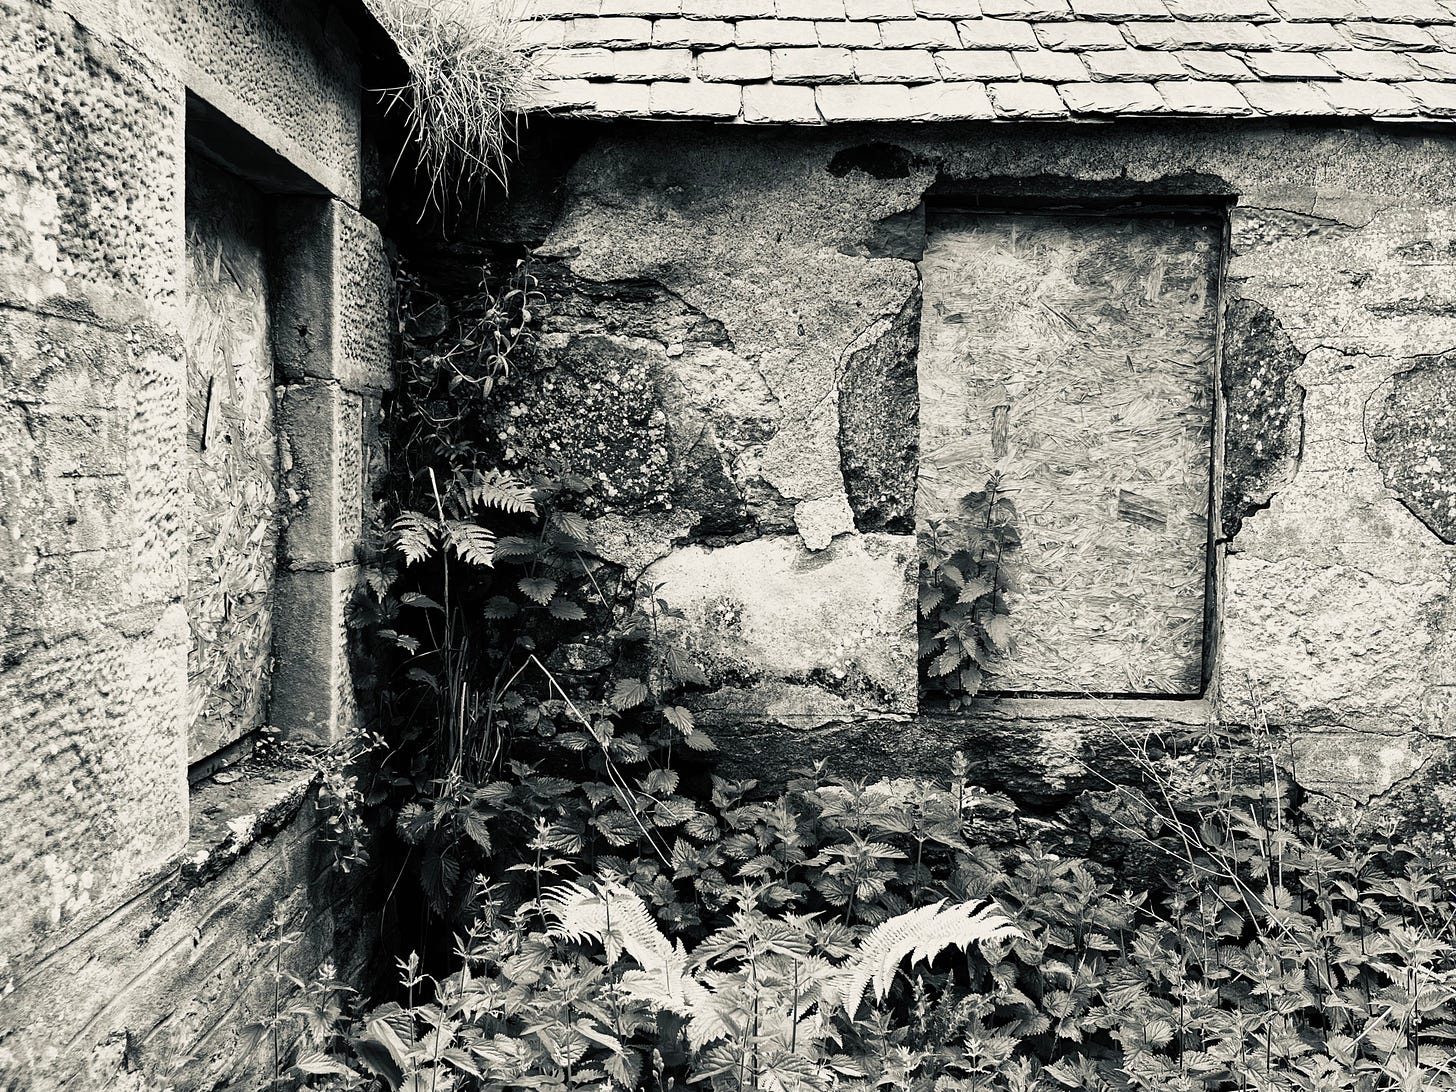 Lush growth of ferns and nettles below the boarded up windows of a ruined croft house; monochrome view